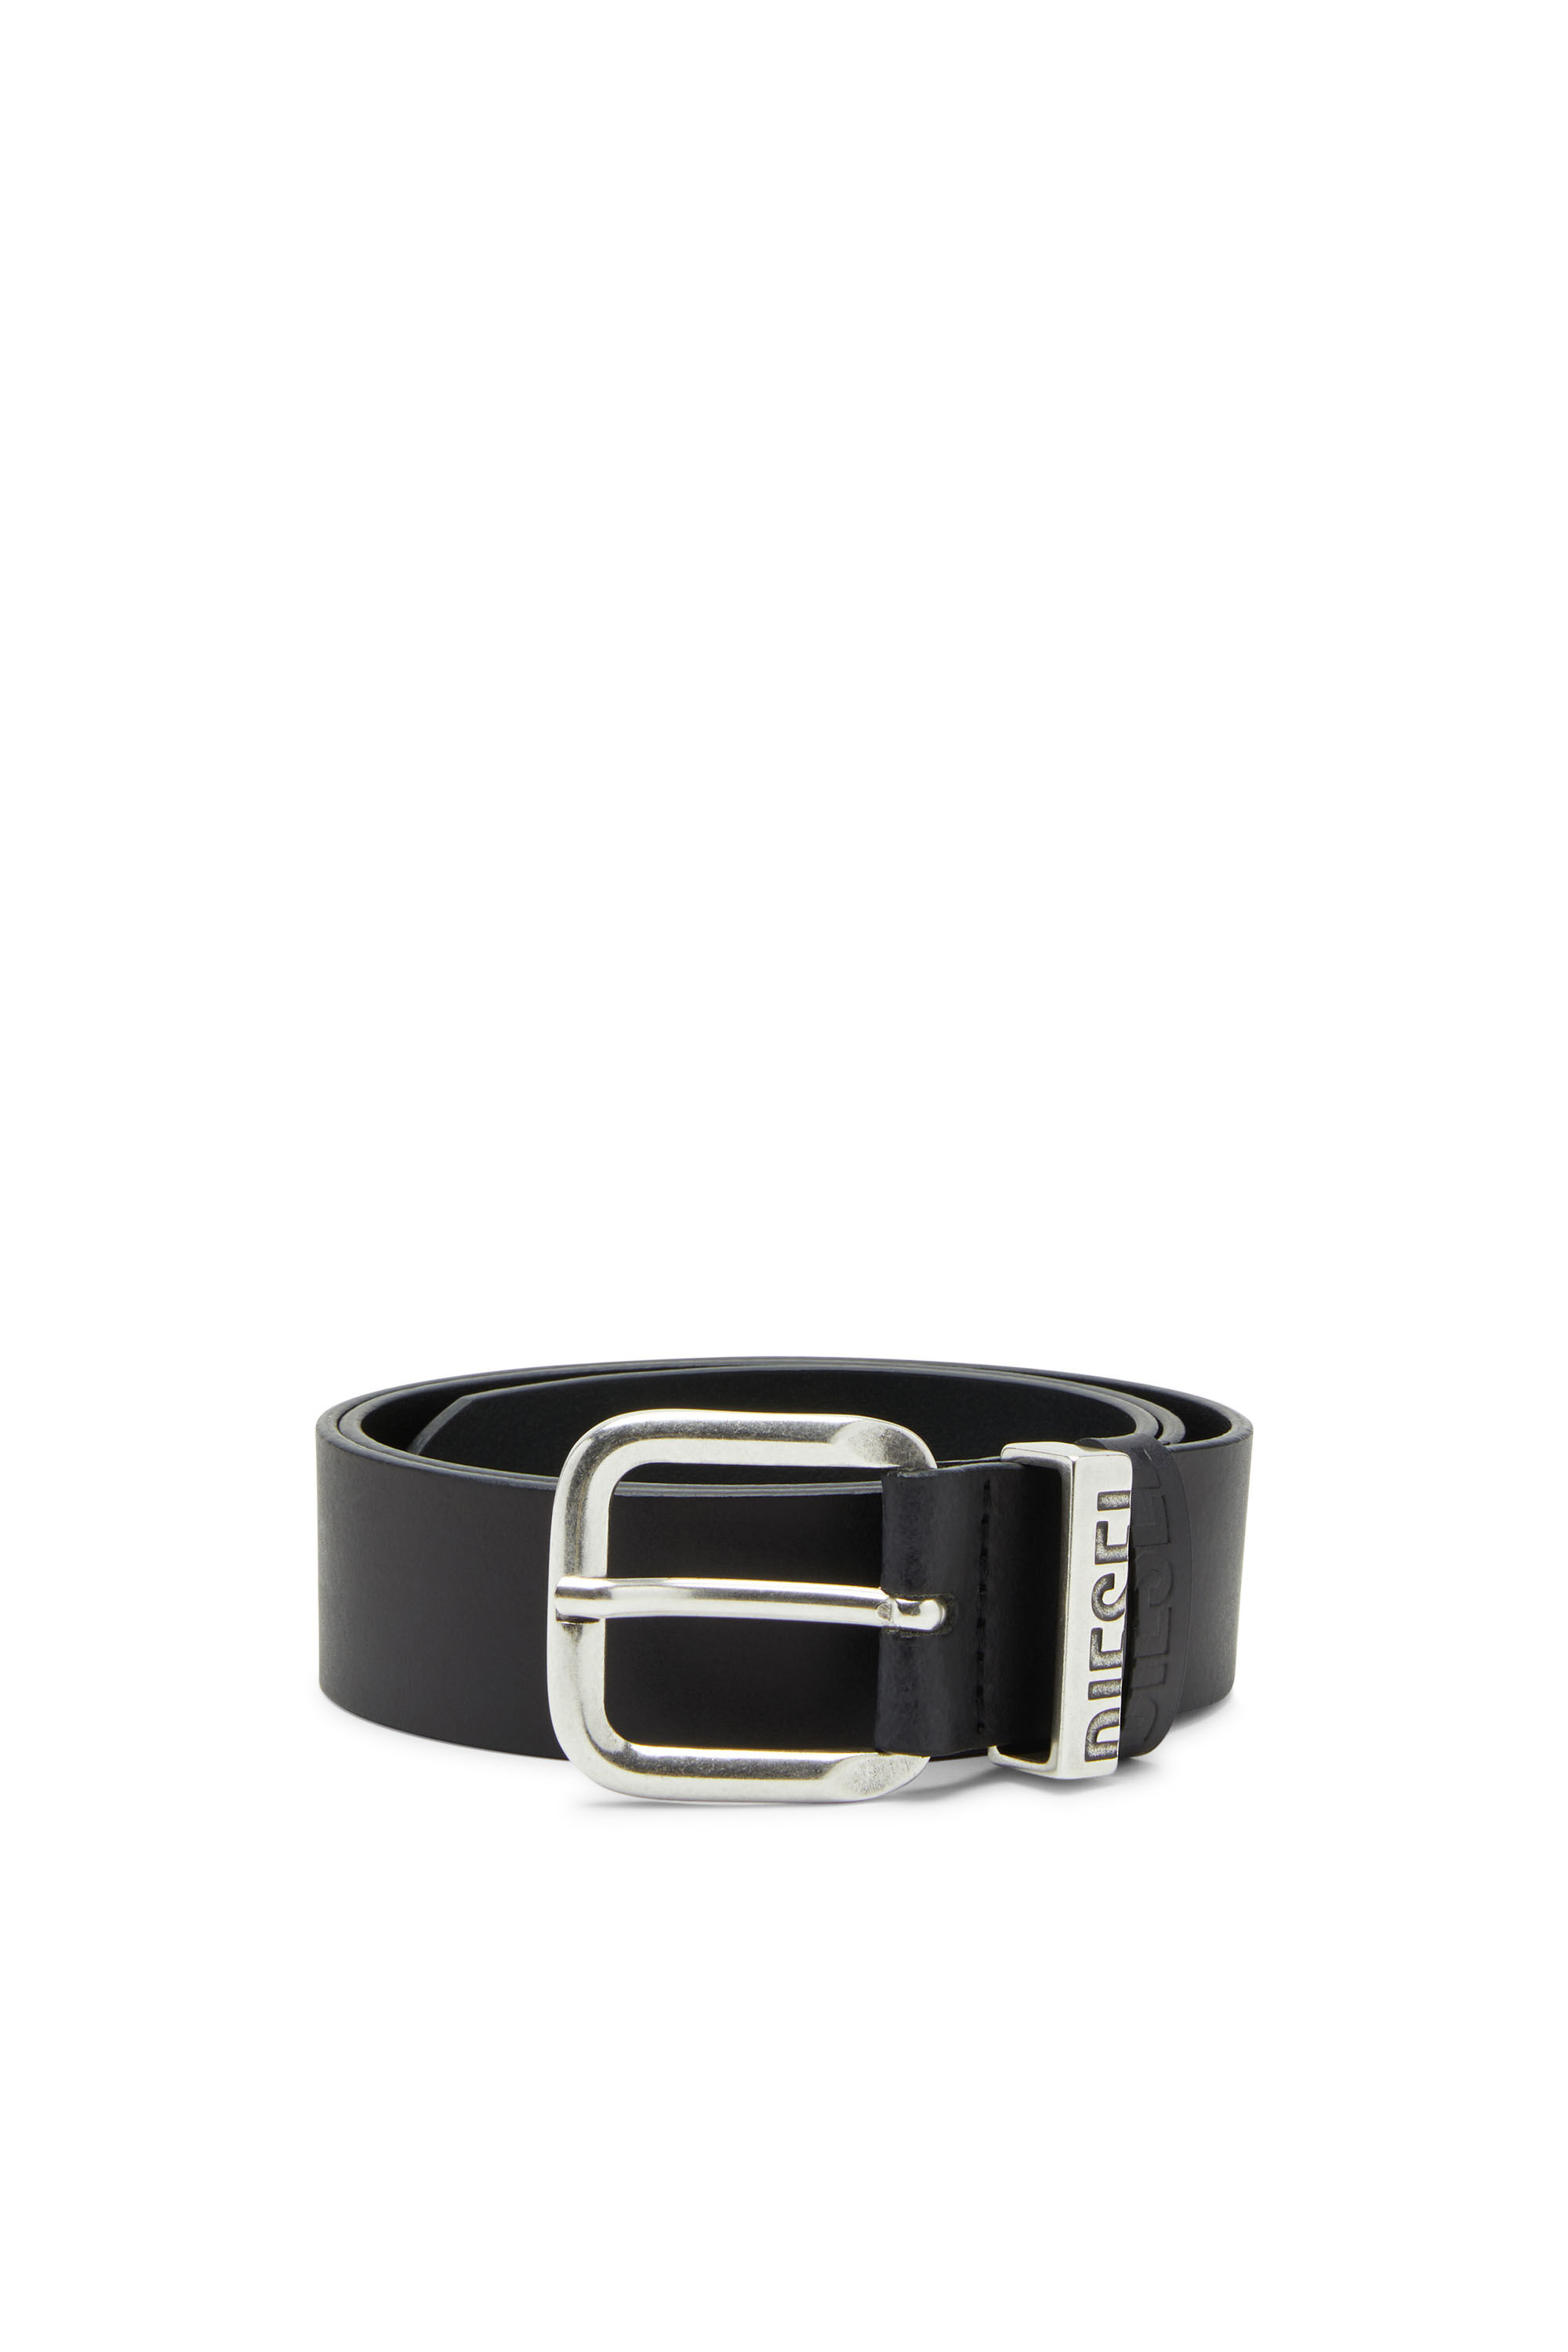 BVISIBLE Boy: Leather belt with metal and leather loop | Diesel